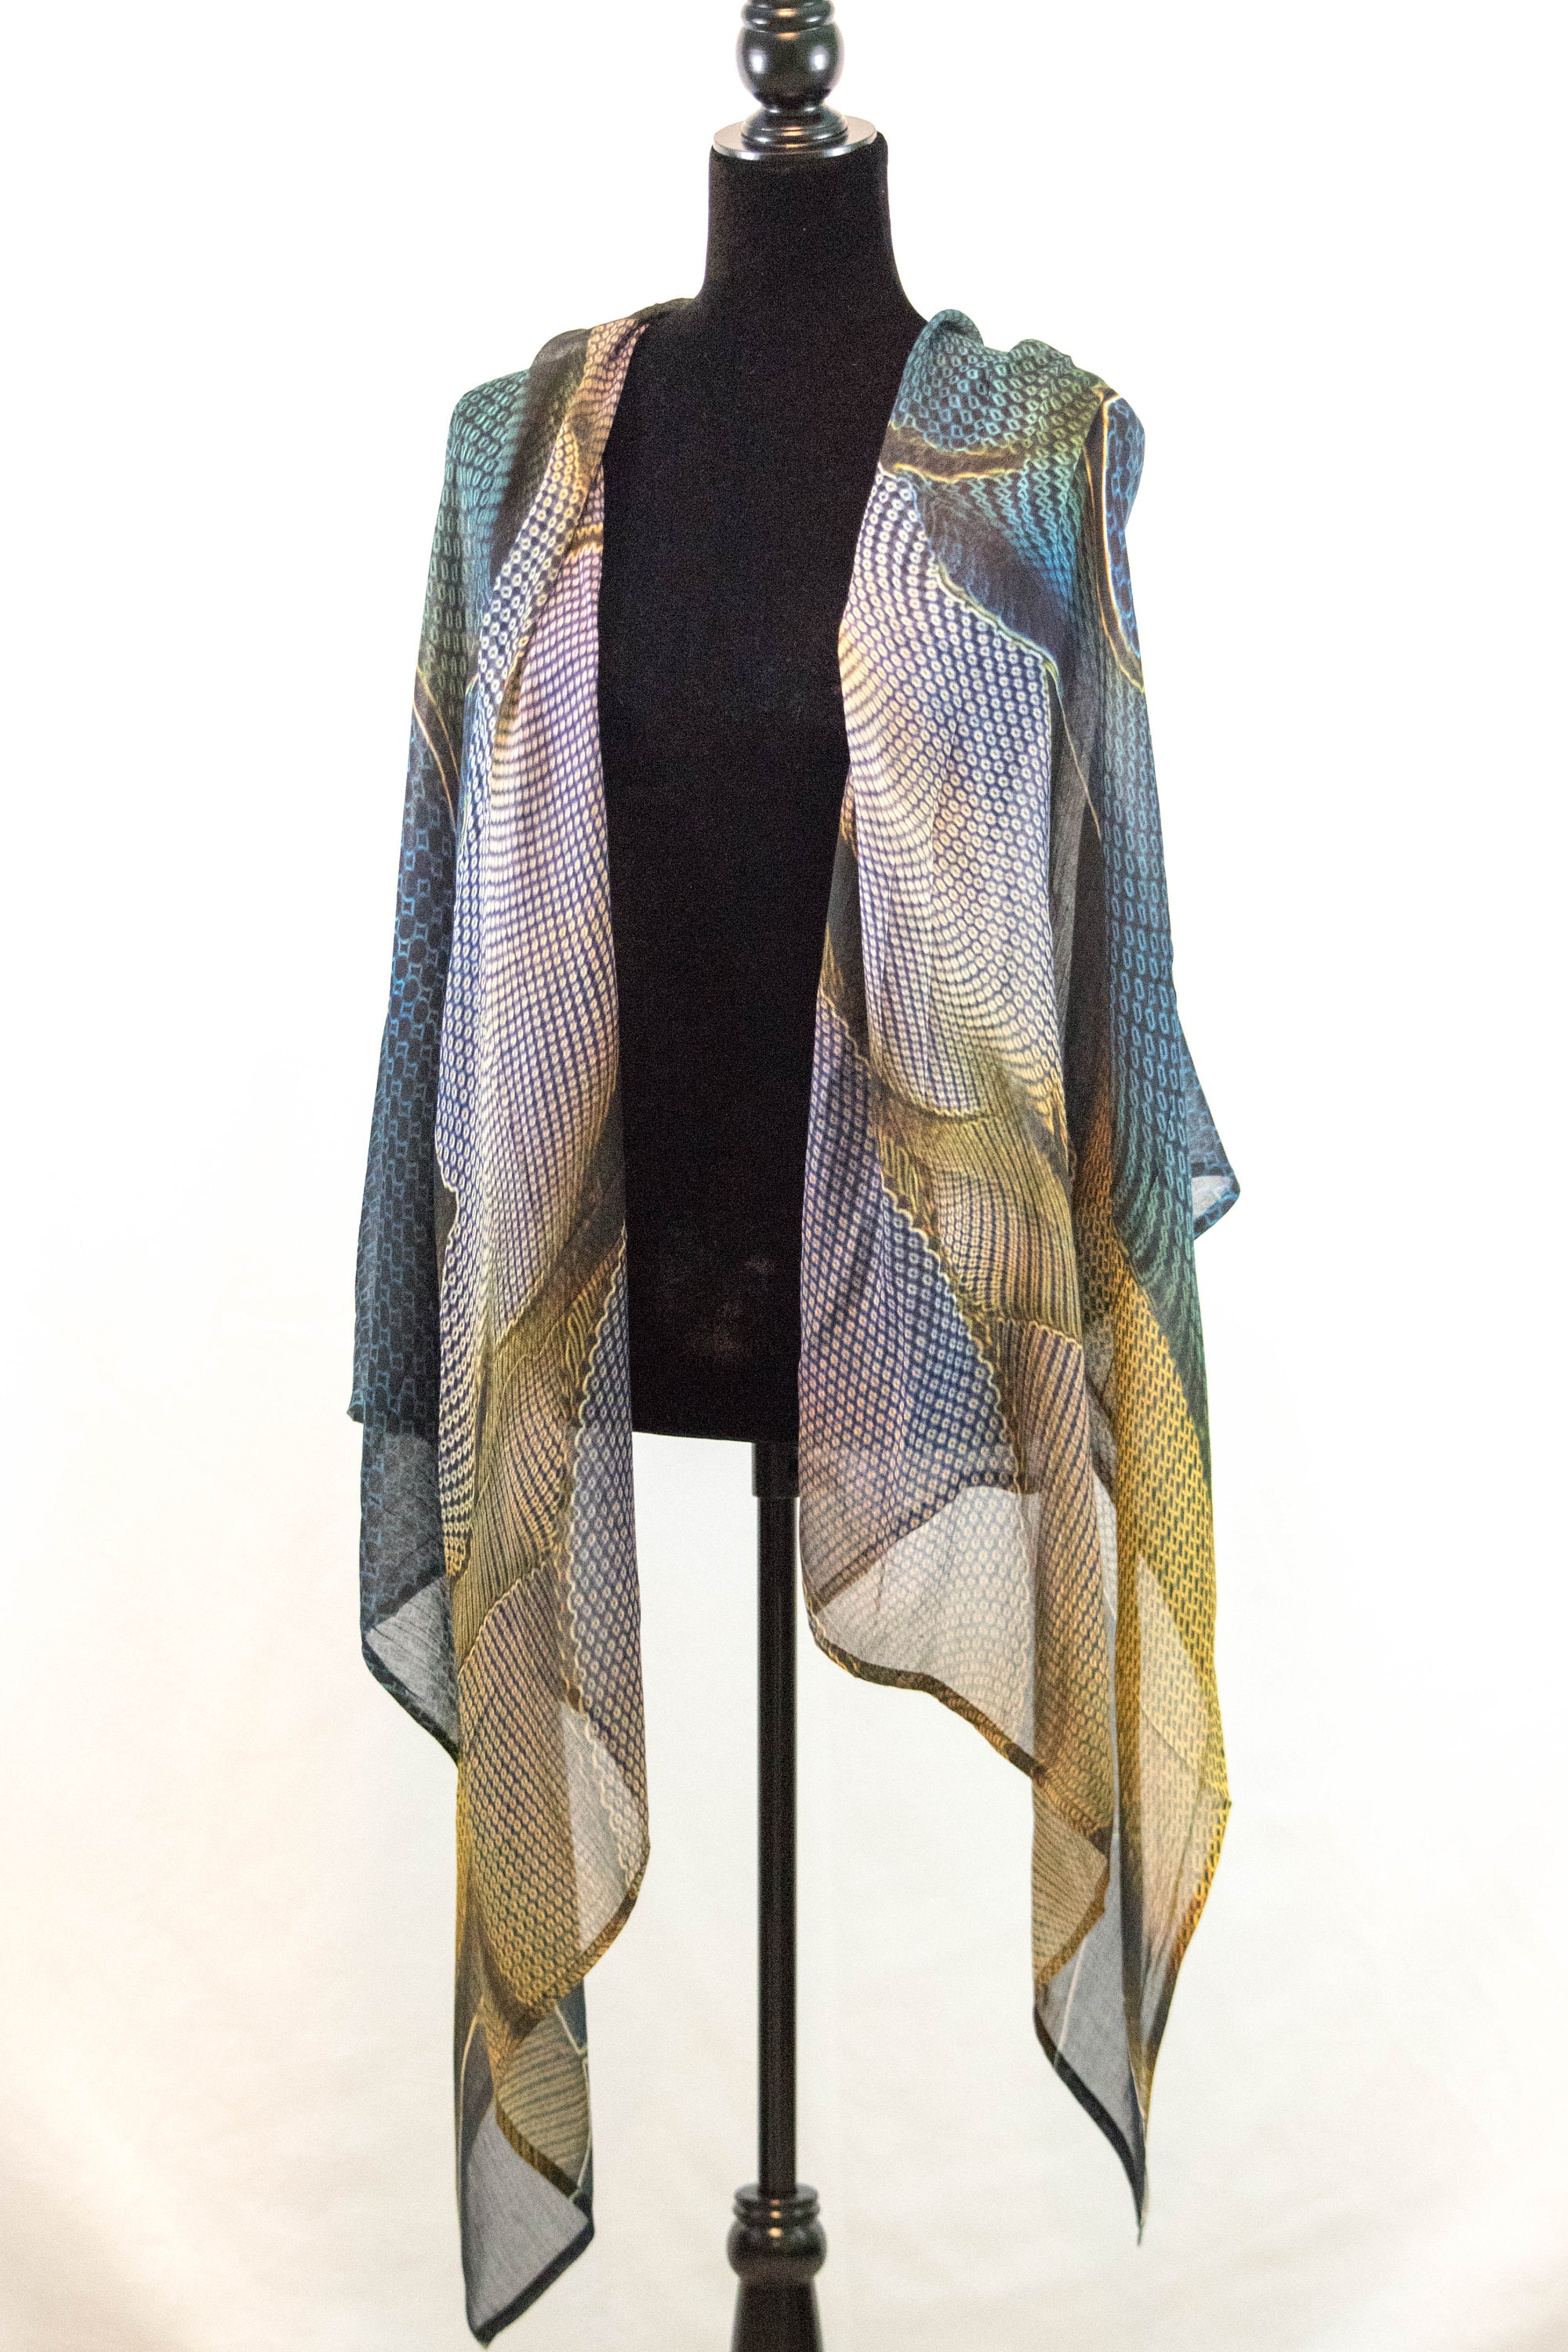 City Wear Urban Accessory, Versatile Scarf Wrap, Chic Gift for Friend ...